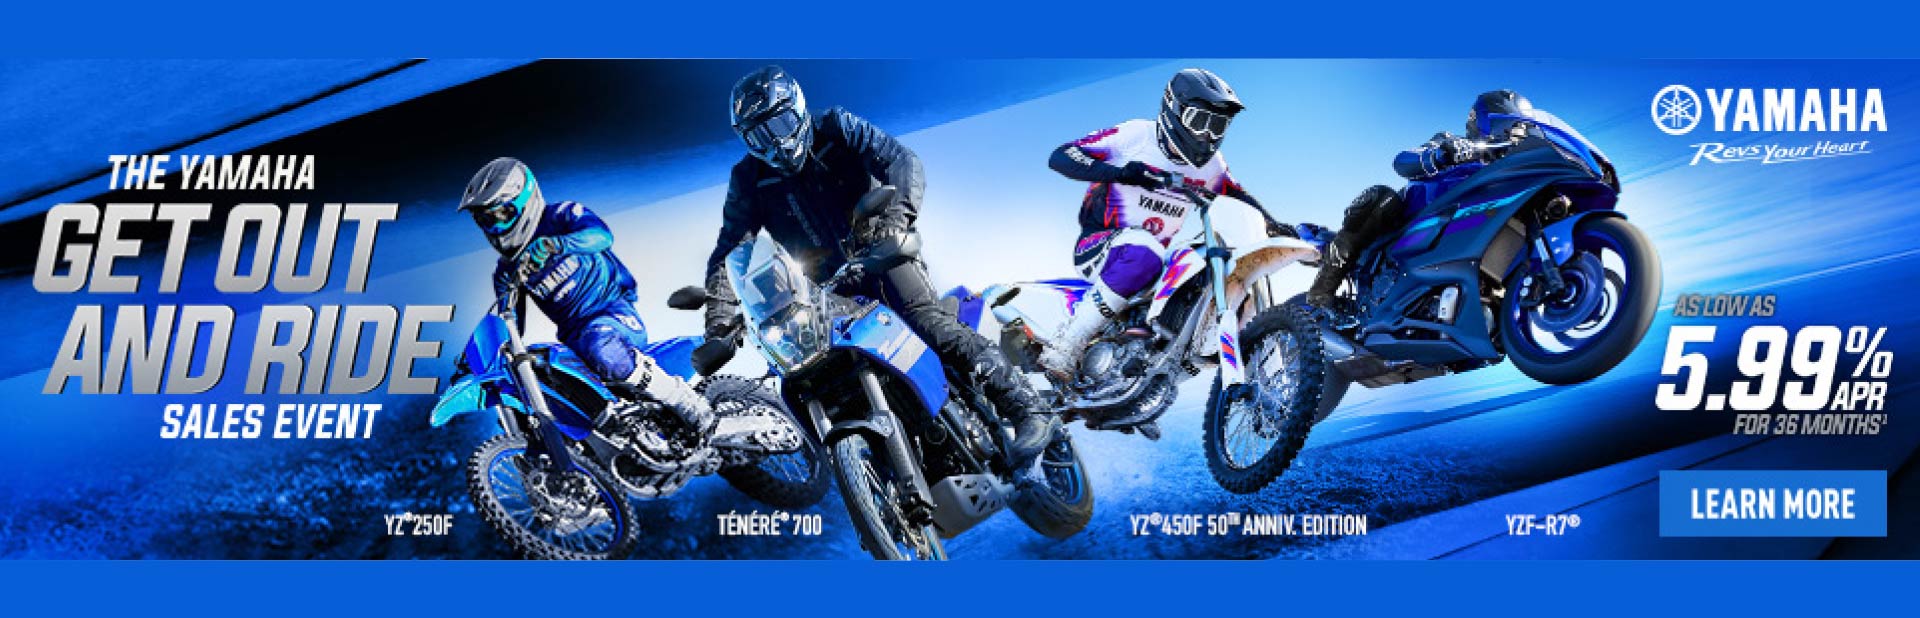 Get Out And Ride Sales Event - Motorcycle